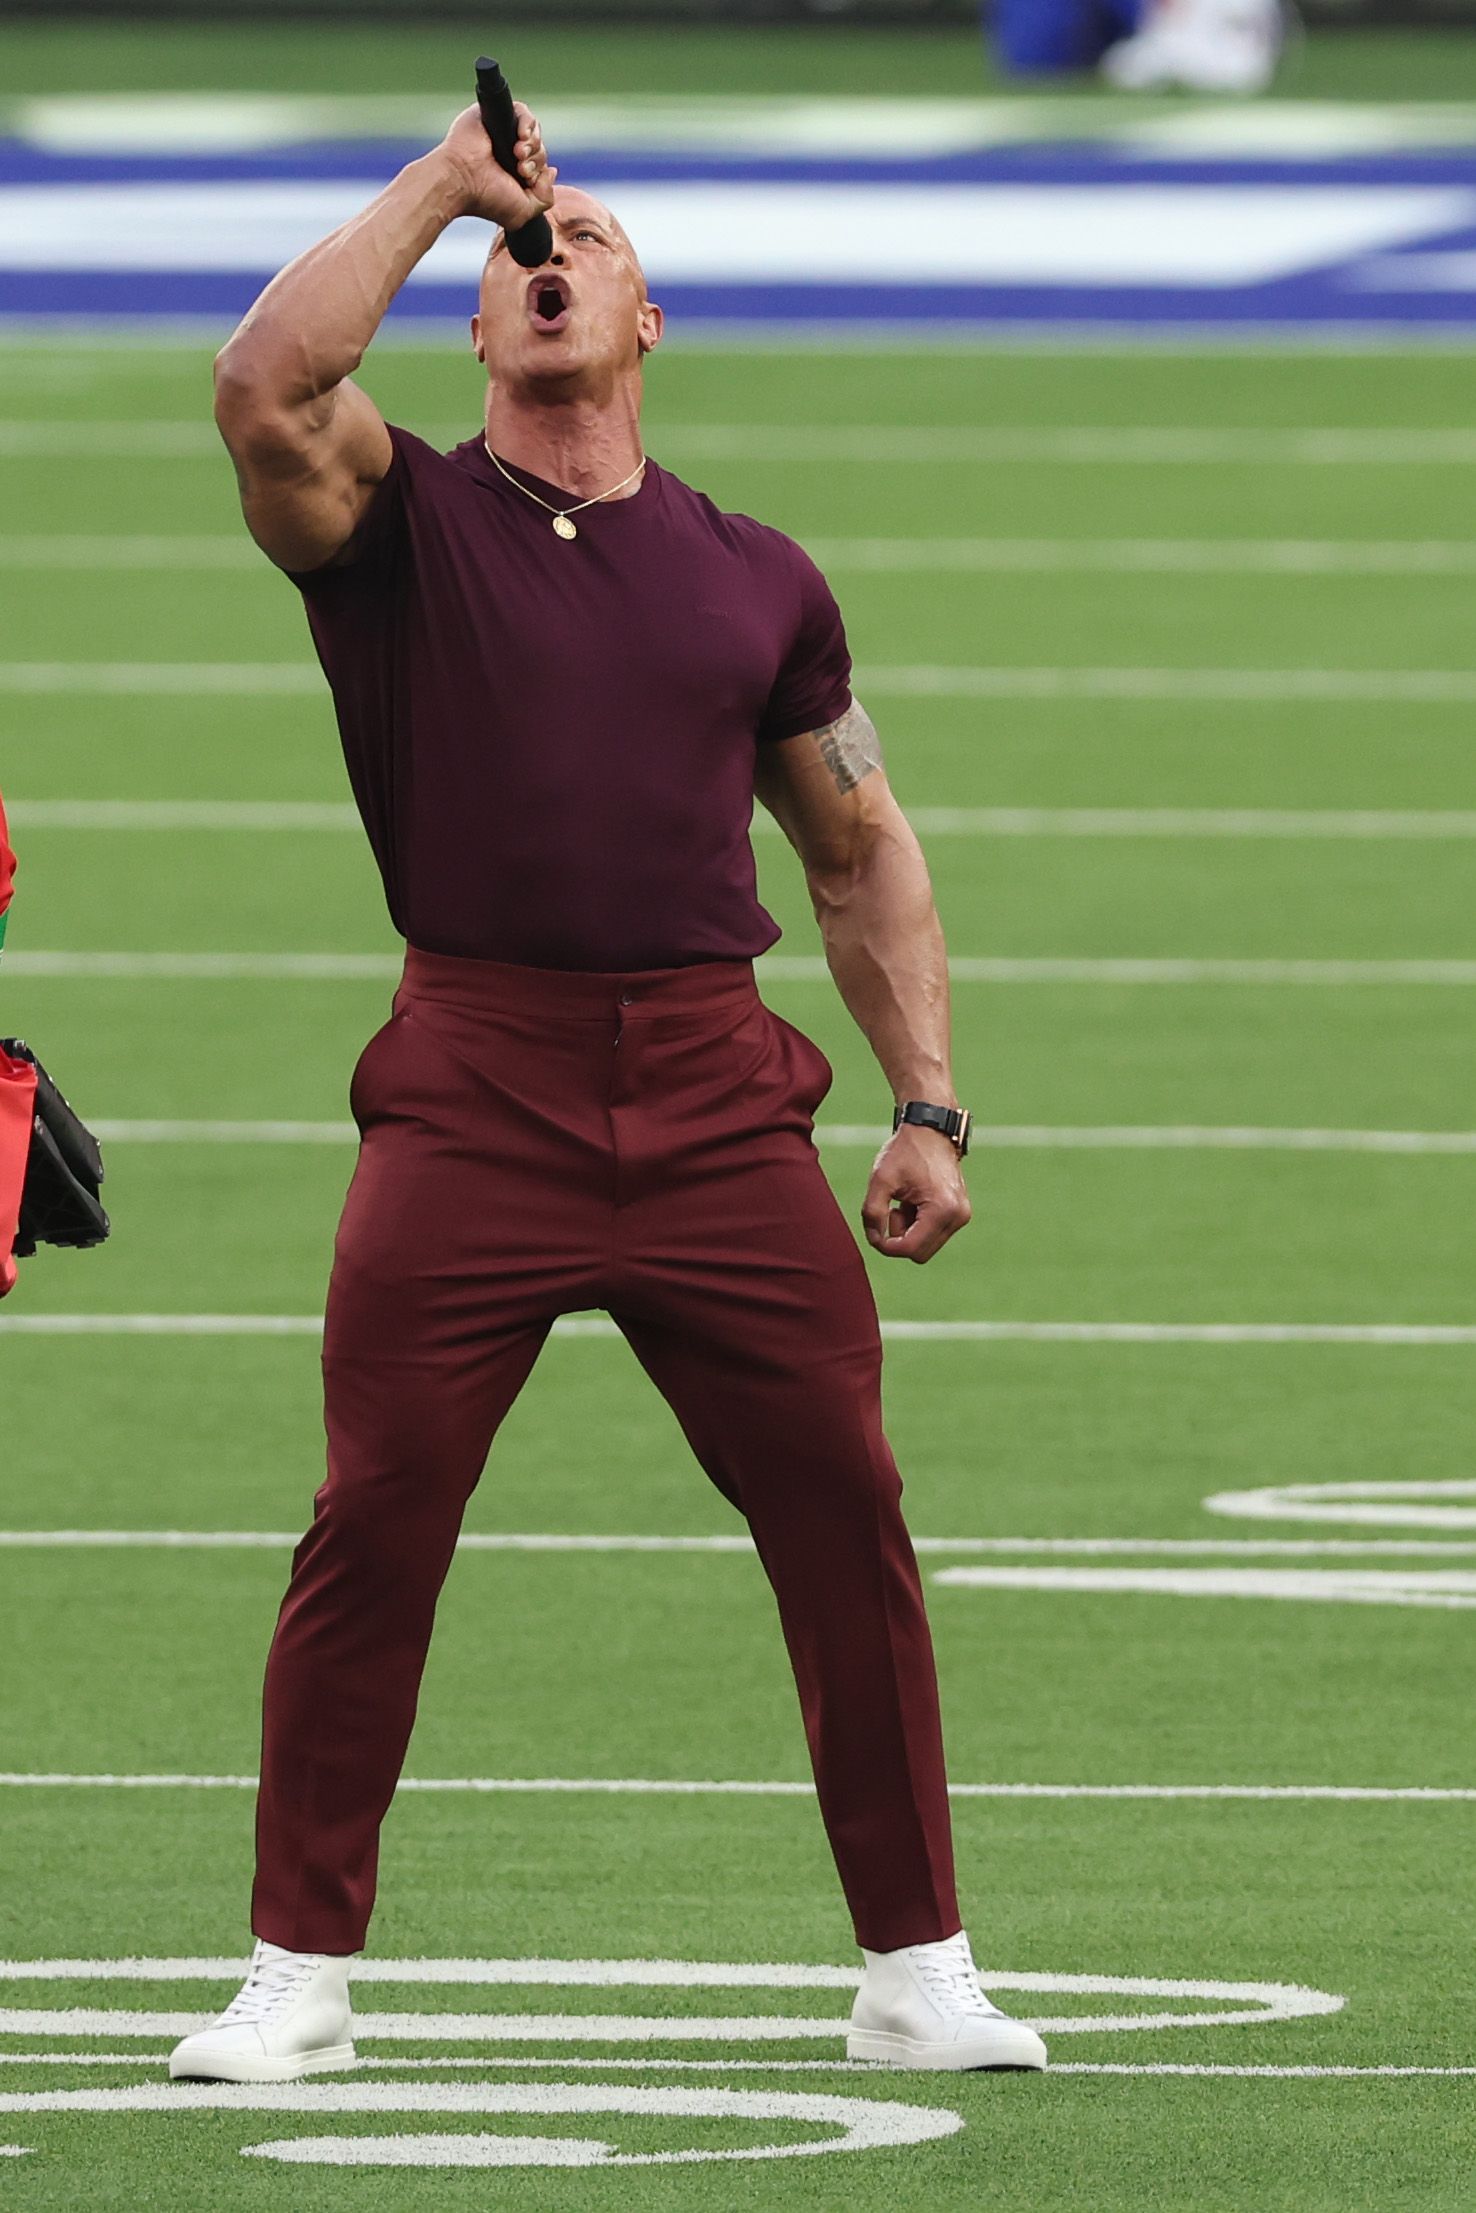 Dwayne Johnson becomes The Rock again to open ﻿﻿Super Bowl 2022